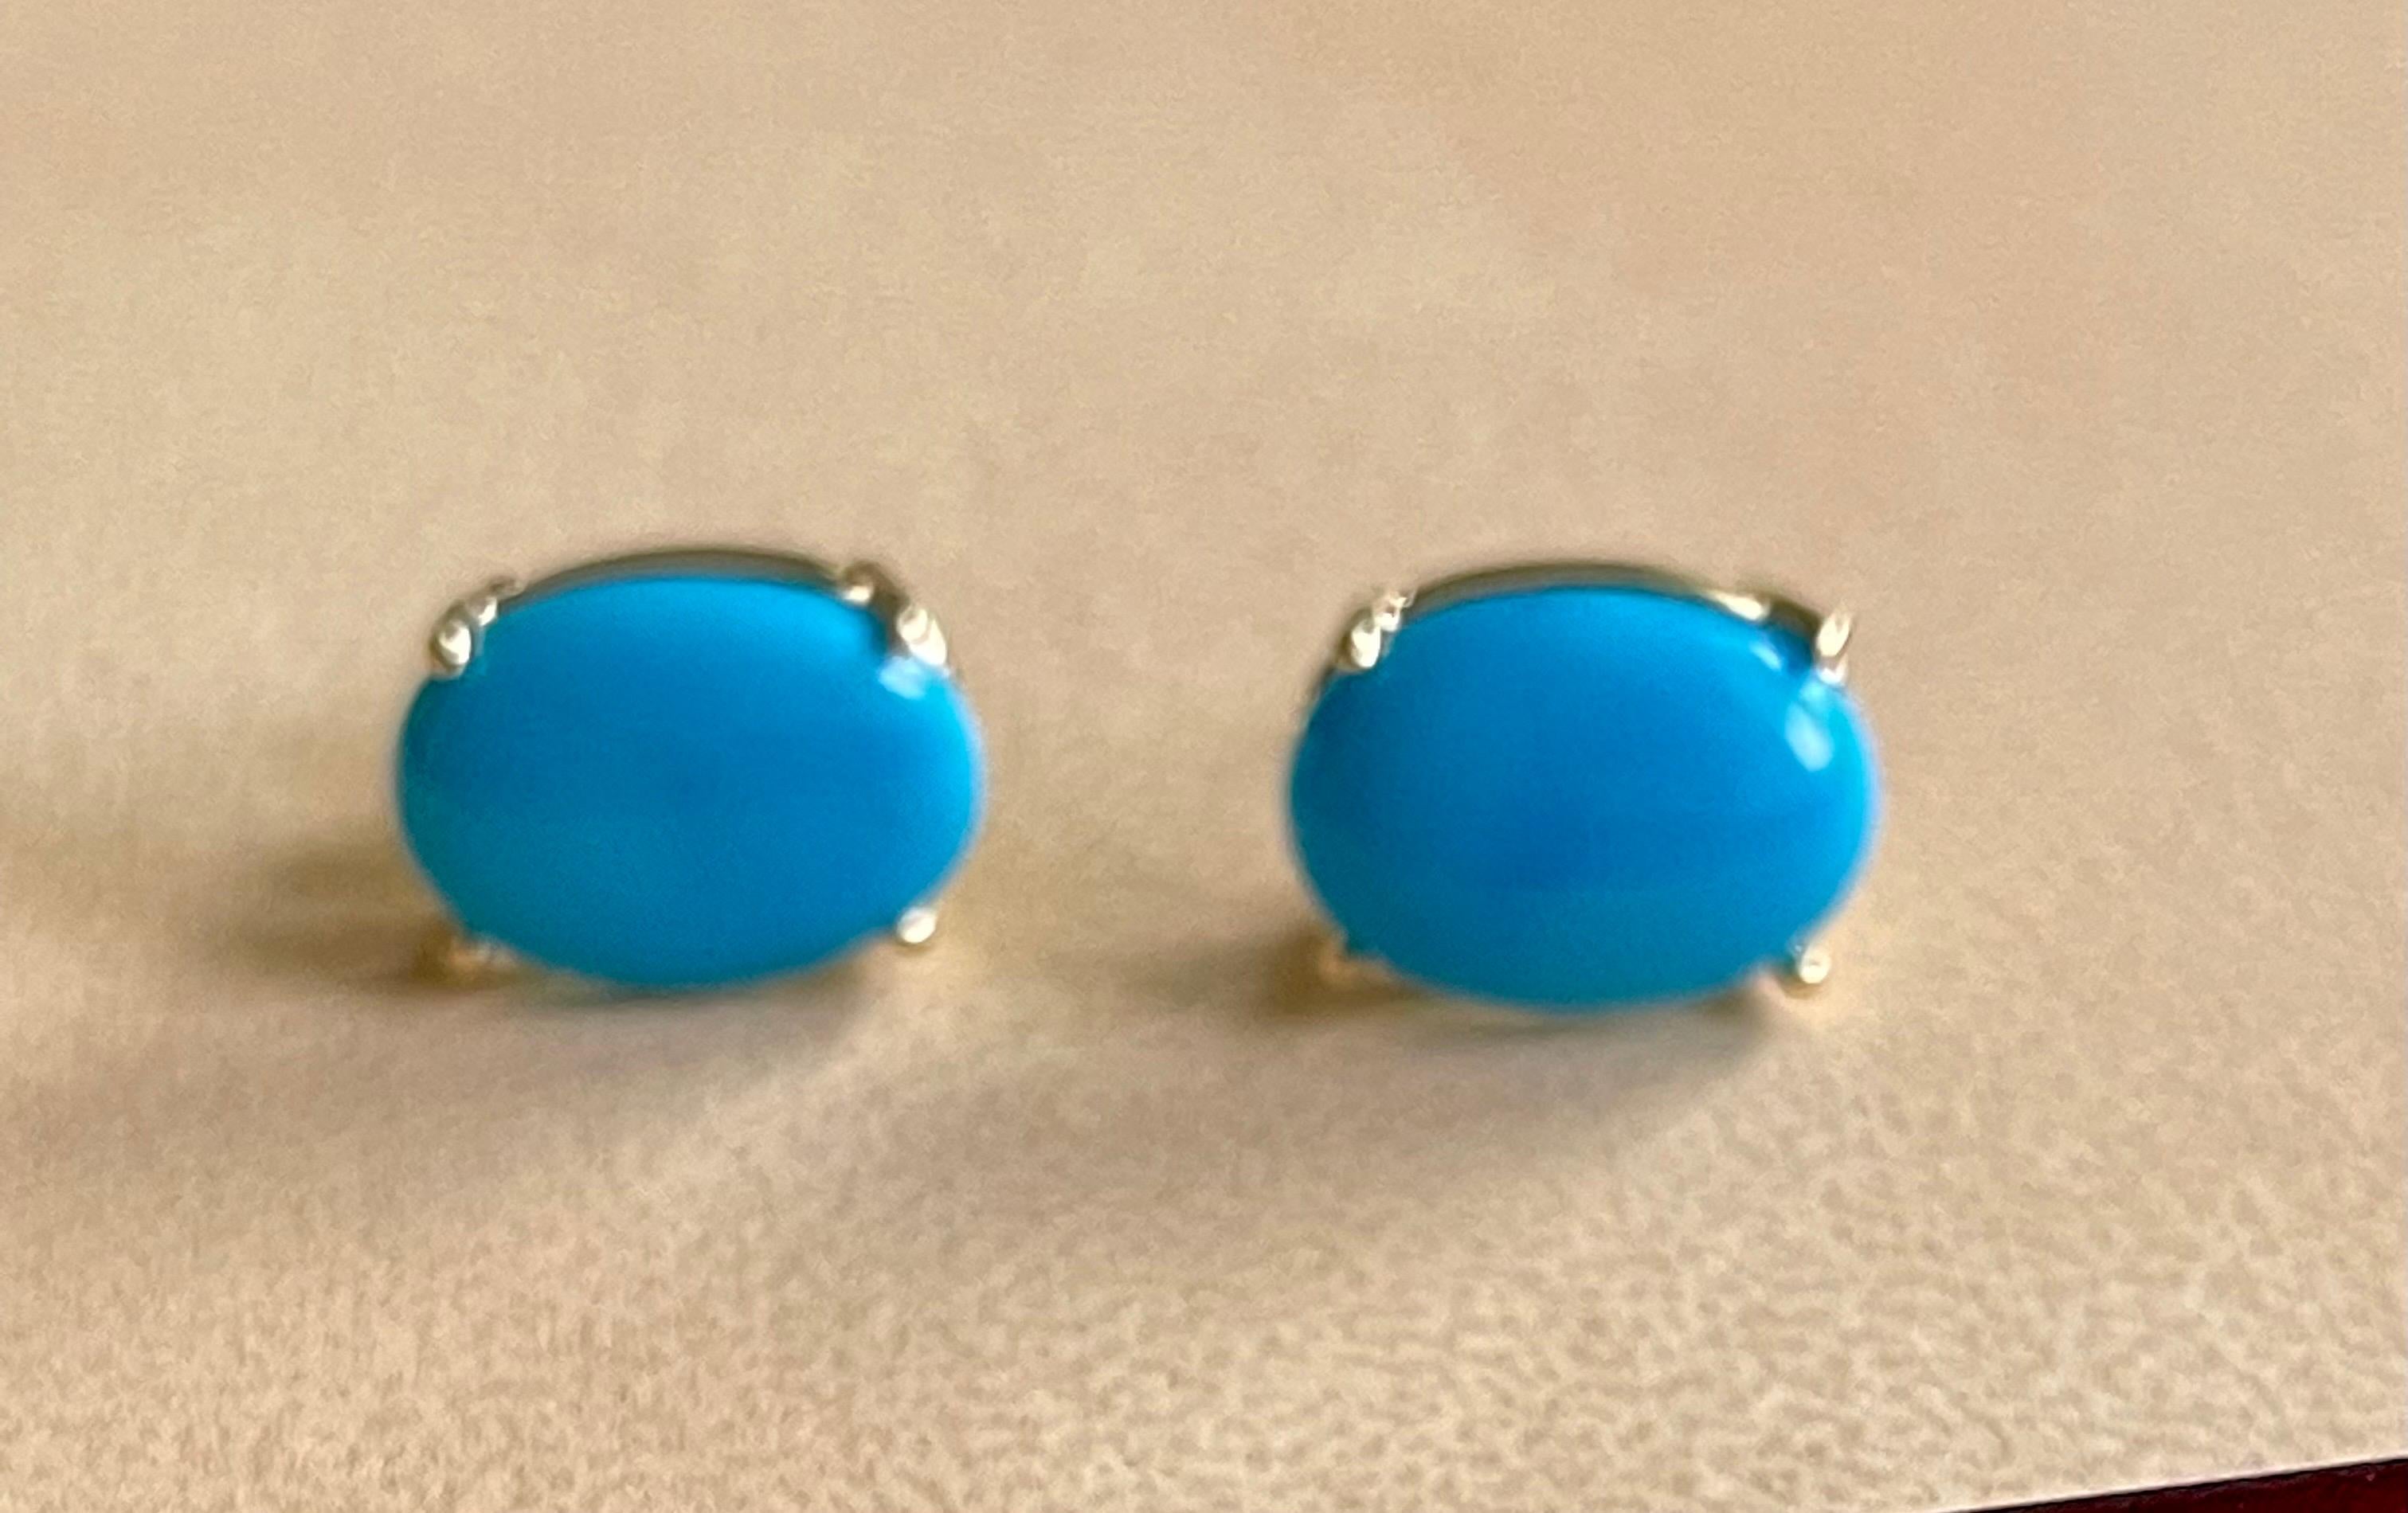 Approximately 10 Ct Oval Natural  Sleeping Beauty Turquoise Stud Earrings 14 K Yellow Gold, Post Back
This exquisite pair of earrings are beautifully crafted with 14 karat Yellow  gold .
Weight of 14 K gold 4 Grams
Turquoise pair is natural sleeping